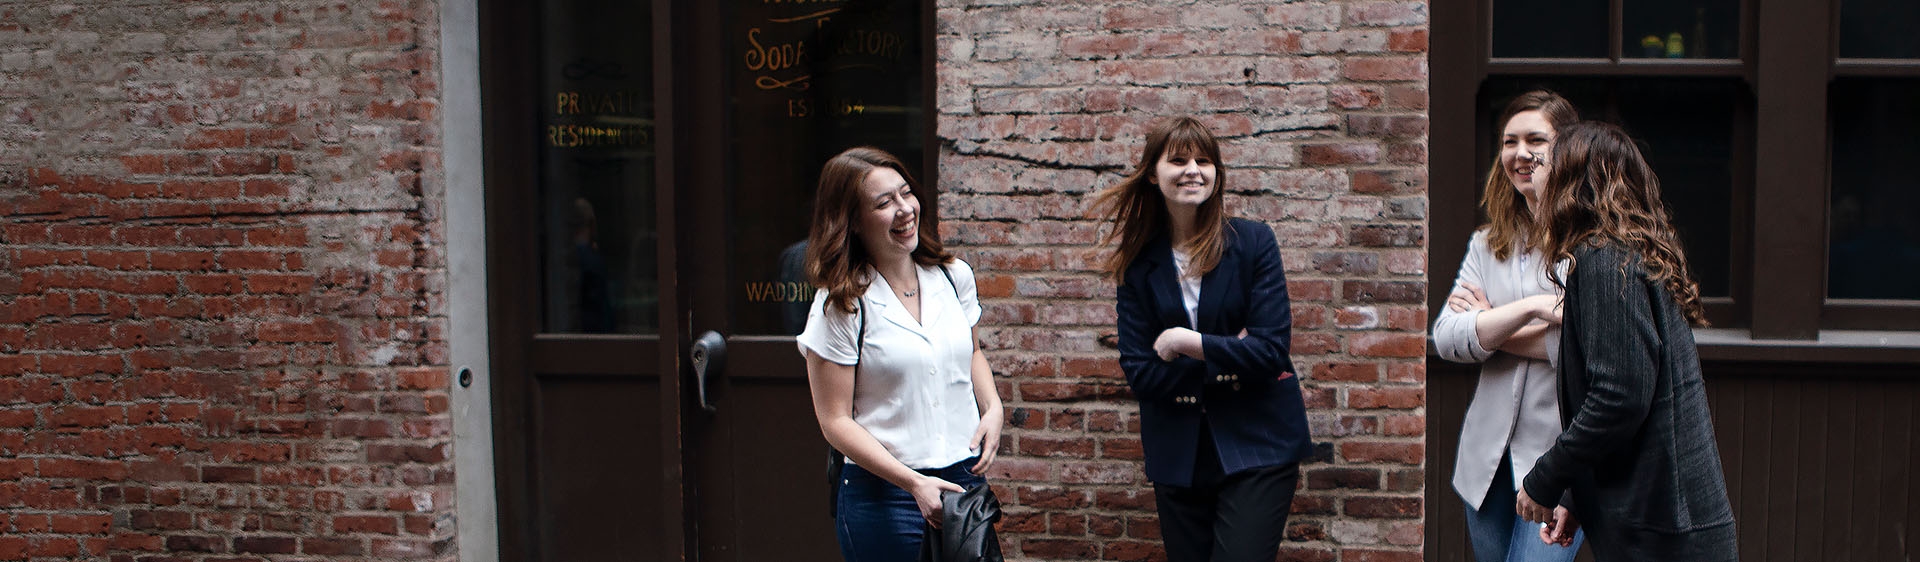 Group shot showing 4 women chatting and laughing together, leaning against a red brick building